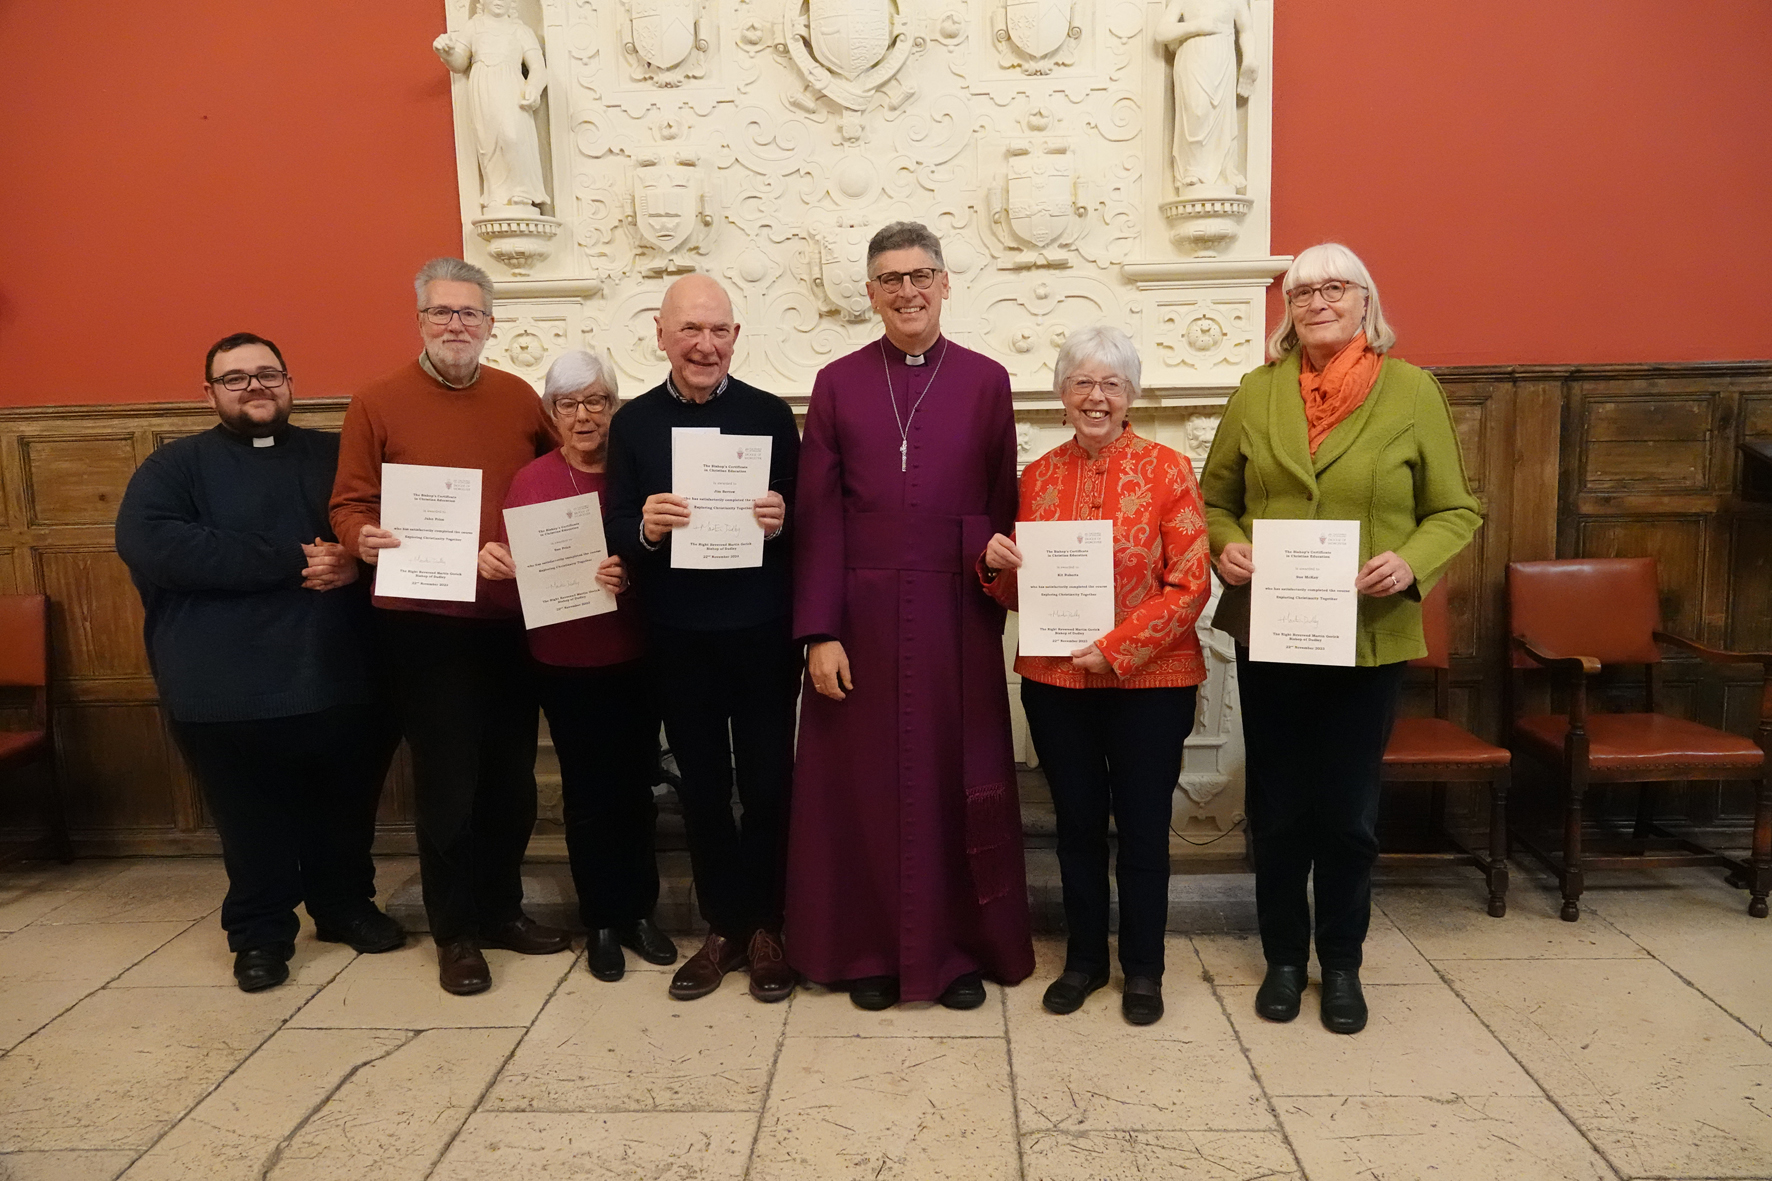 The group of people who completed their Bishop's certificate in Malvern standing with Bishop Martin